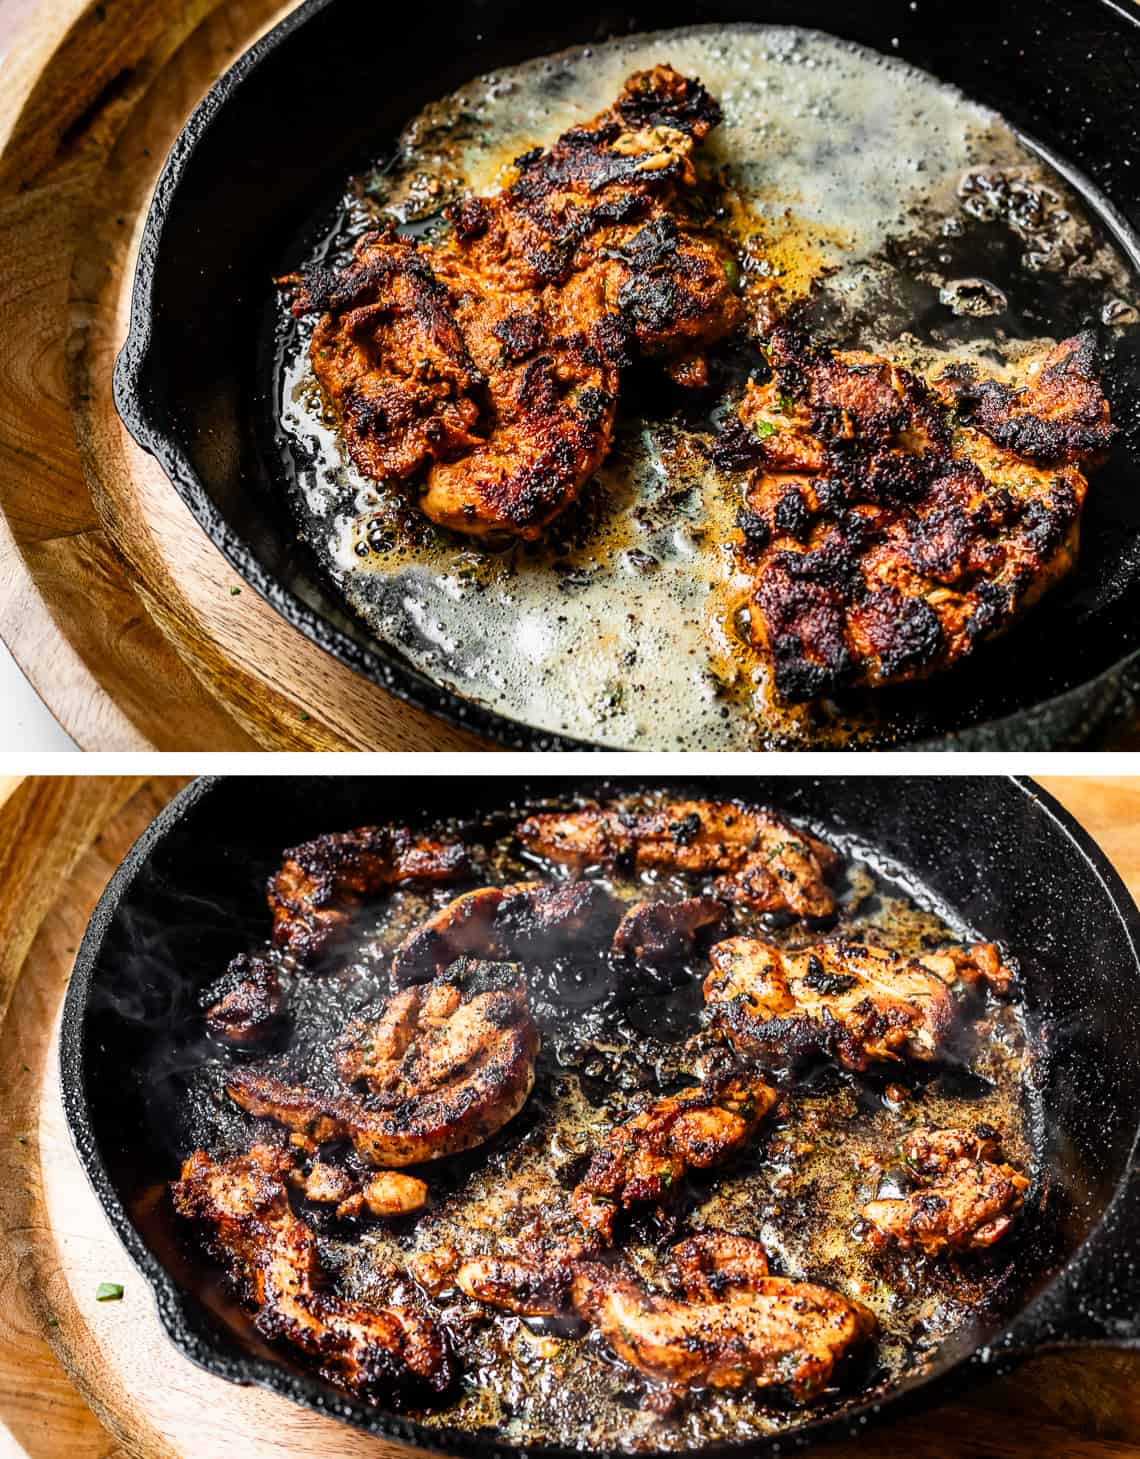 top whole chicken thighs getting blackened in cast iron skillet, bottom several small pieces frying.